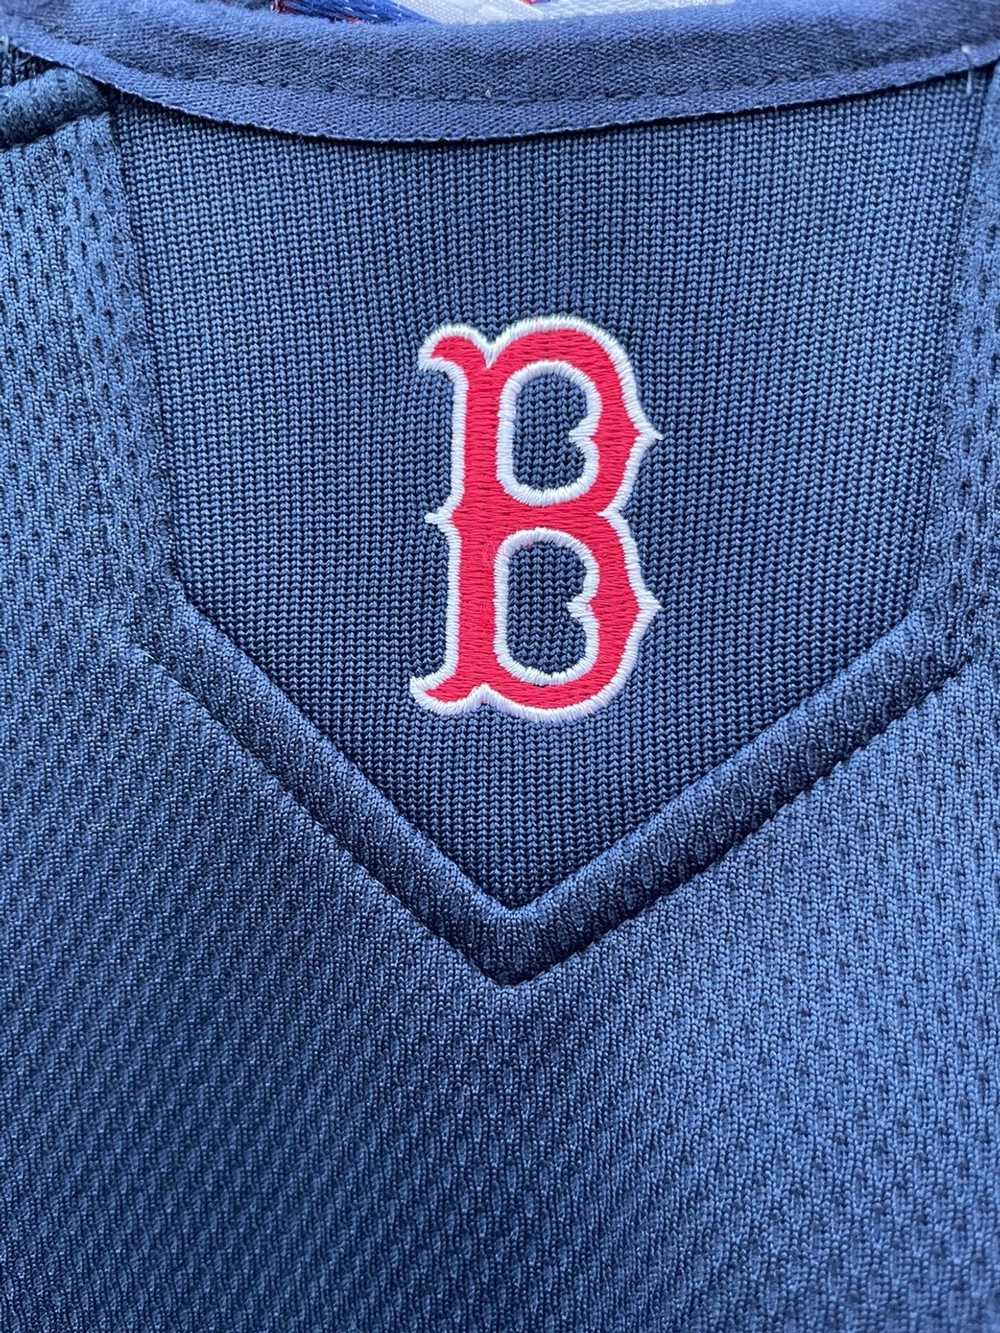 BOSTON RED SOX ALL STAR GAME NATIONAL LEAGUE VINTAGE 1999 MAJESTIC MLB  JERSEY – The Felt Fanatic